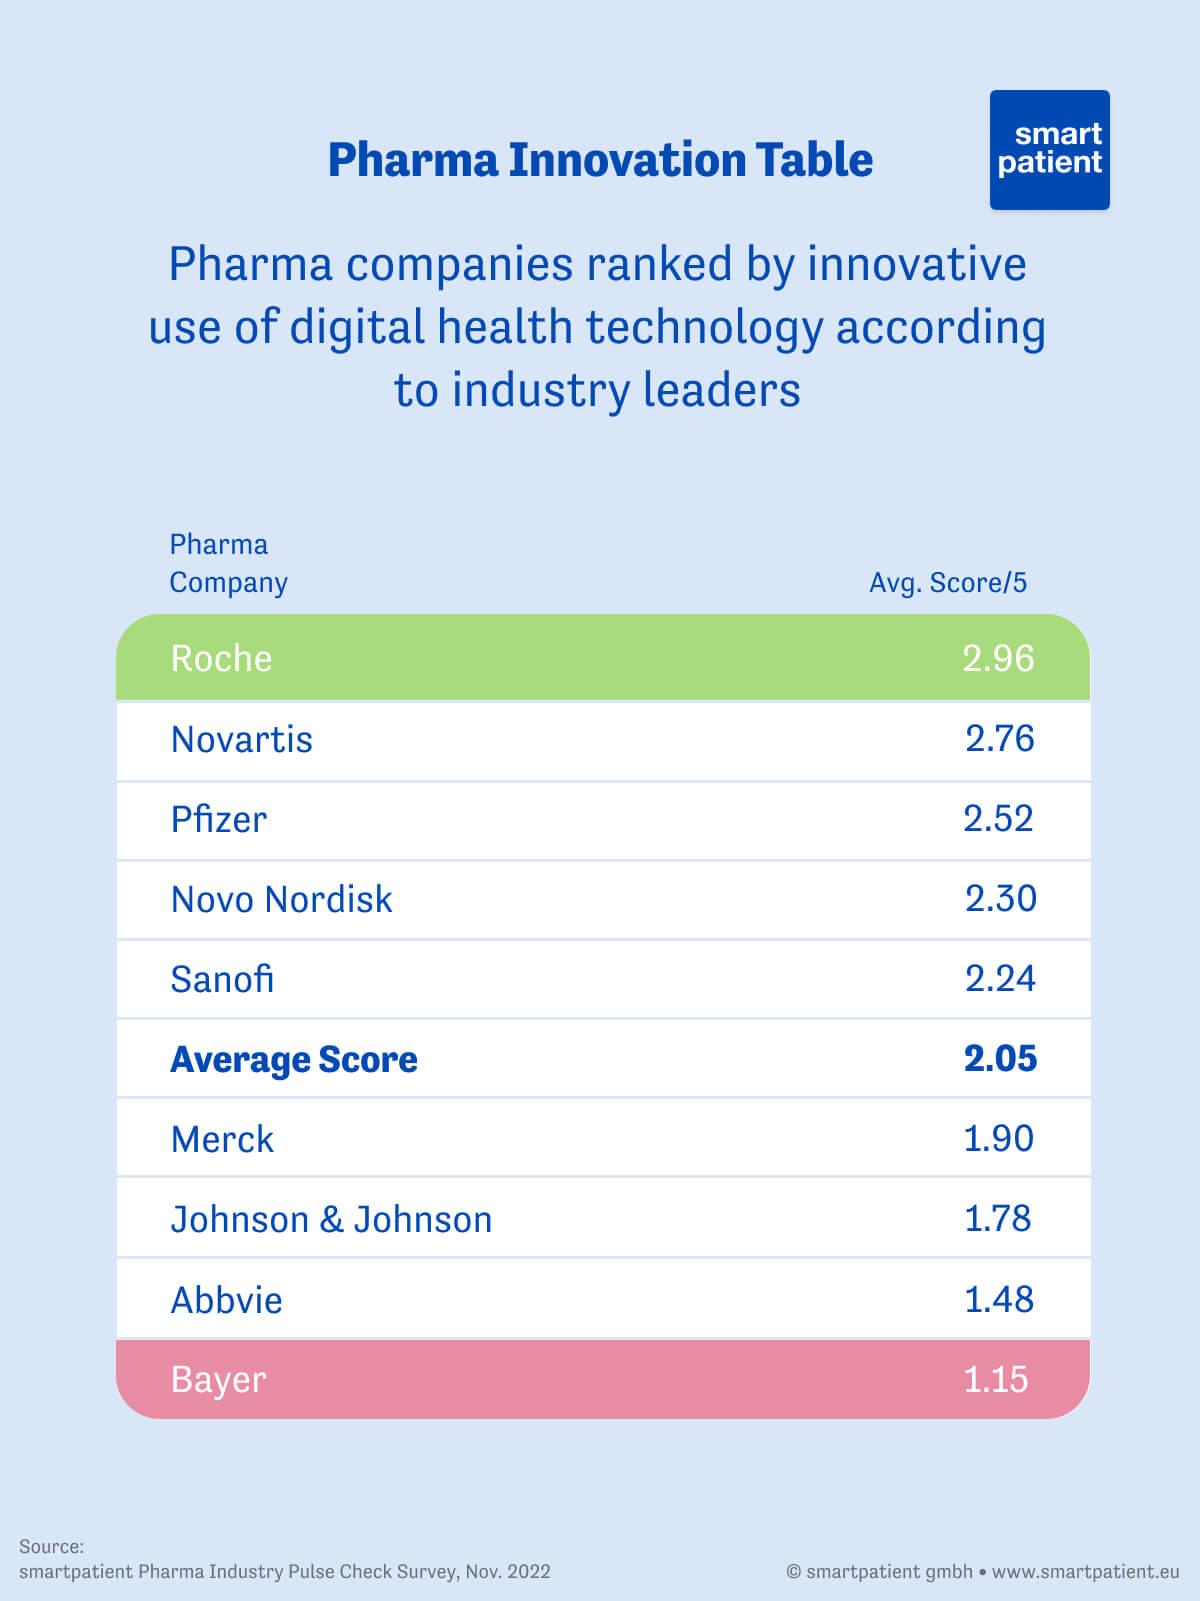 Table of the most innovative pharma companies in relation to digital health according to Industry Pulse Check respondents